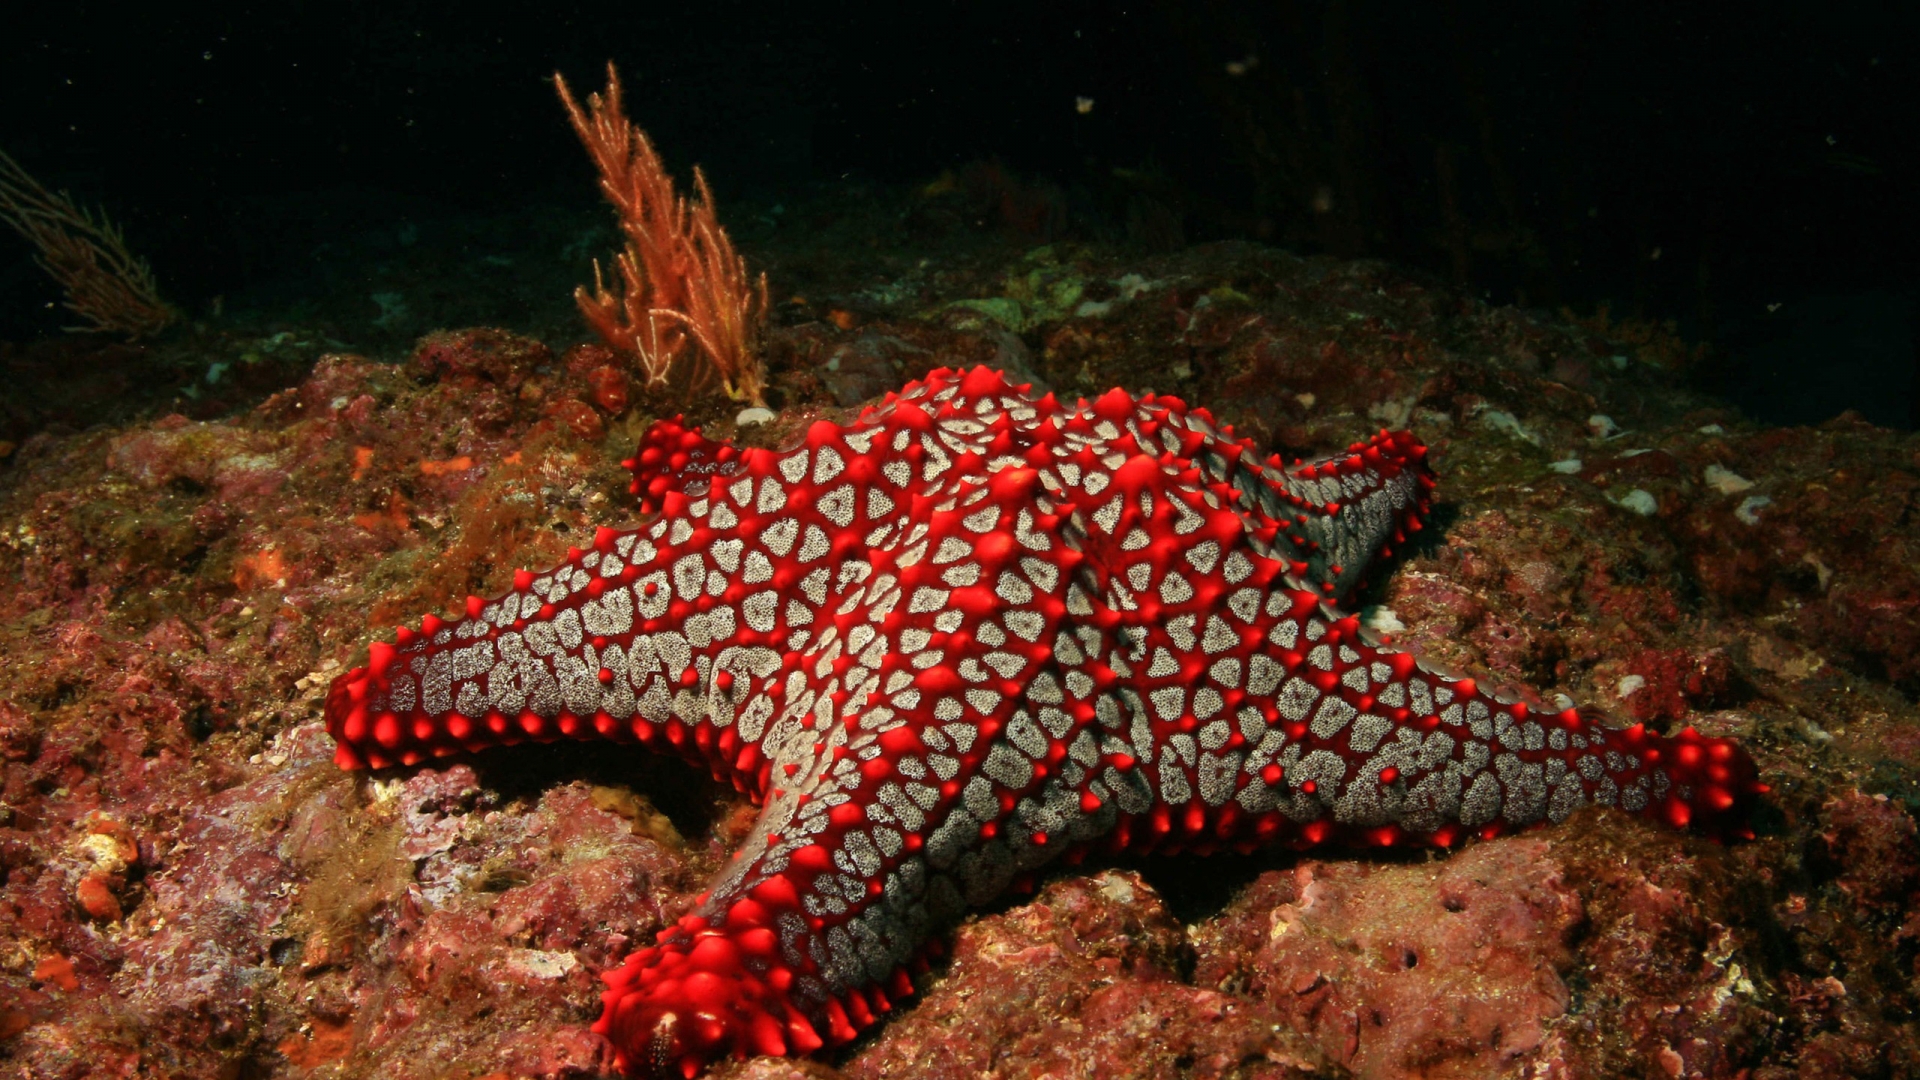 Red Sea Star for 1920 x 1080 HDTV 1080p resolution